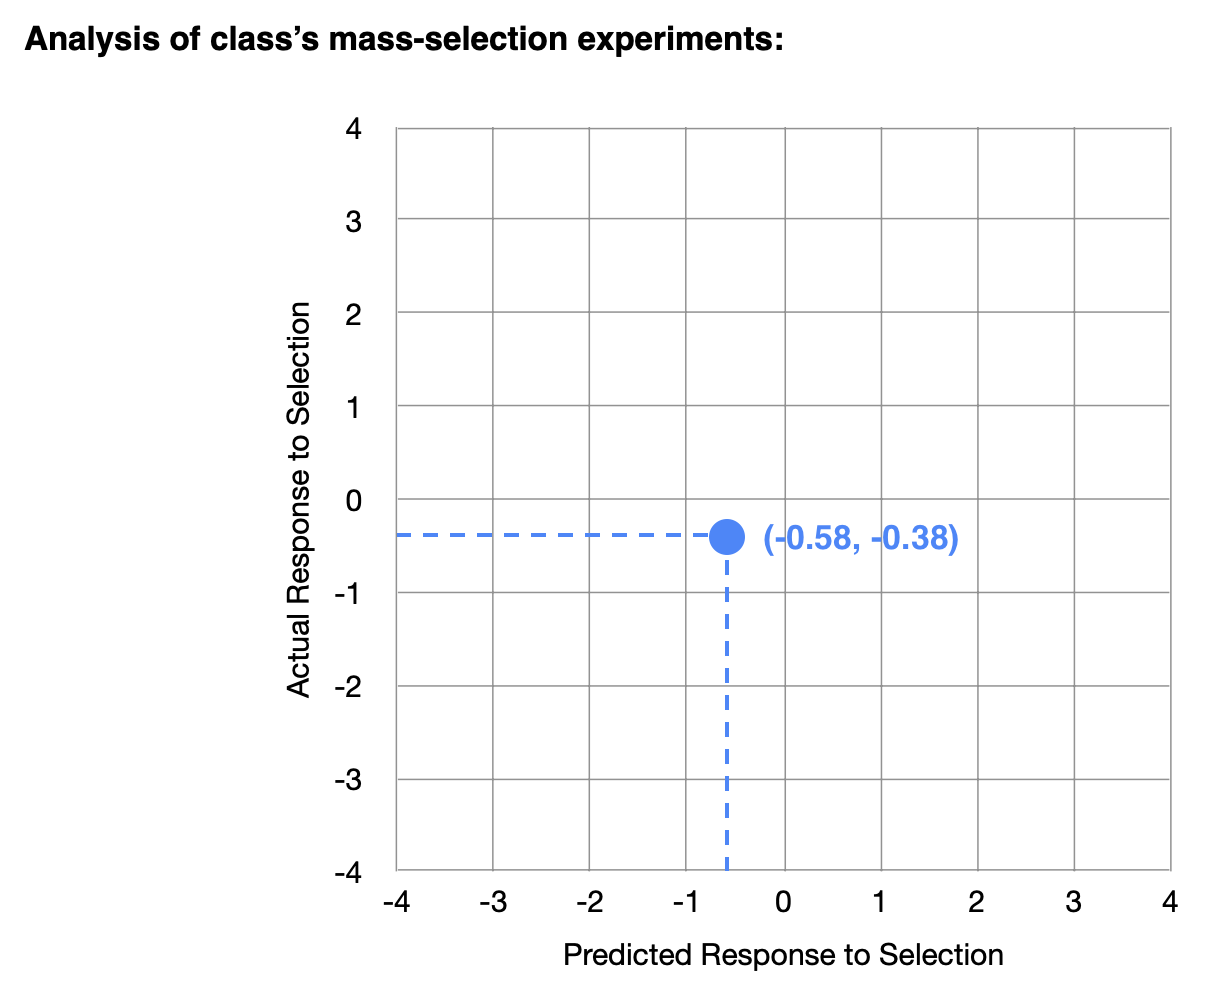 Make a scatterplot showing the actual response versus the predicted response for your mass selection experiment and those of your classmates. Your data point will be in a different location than mine.